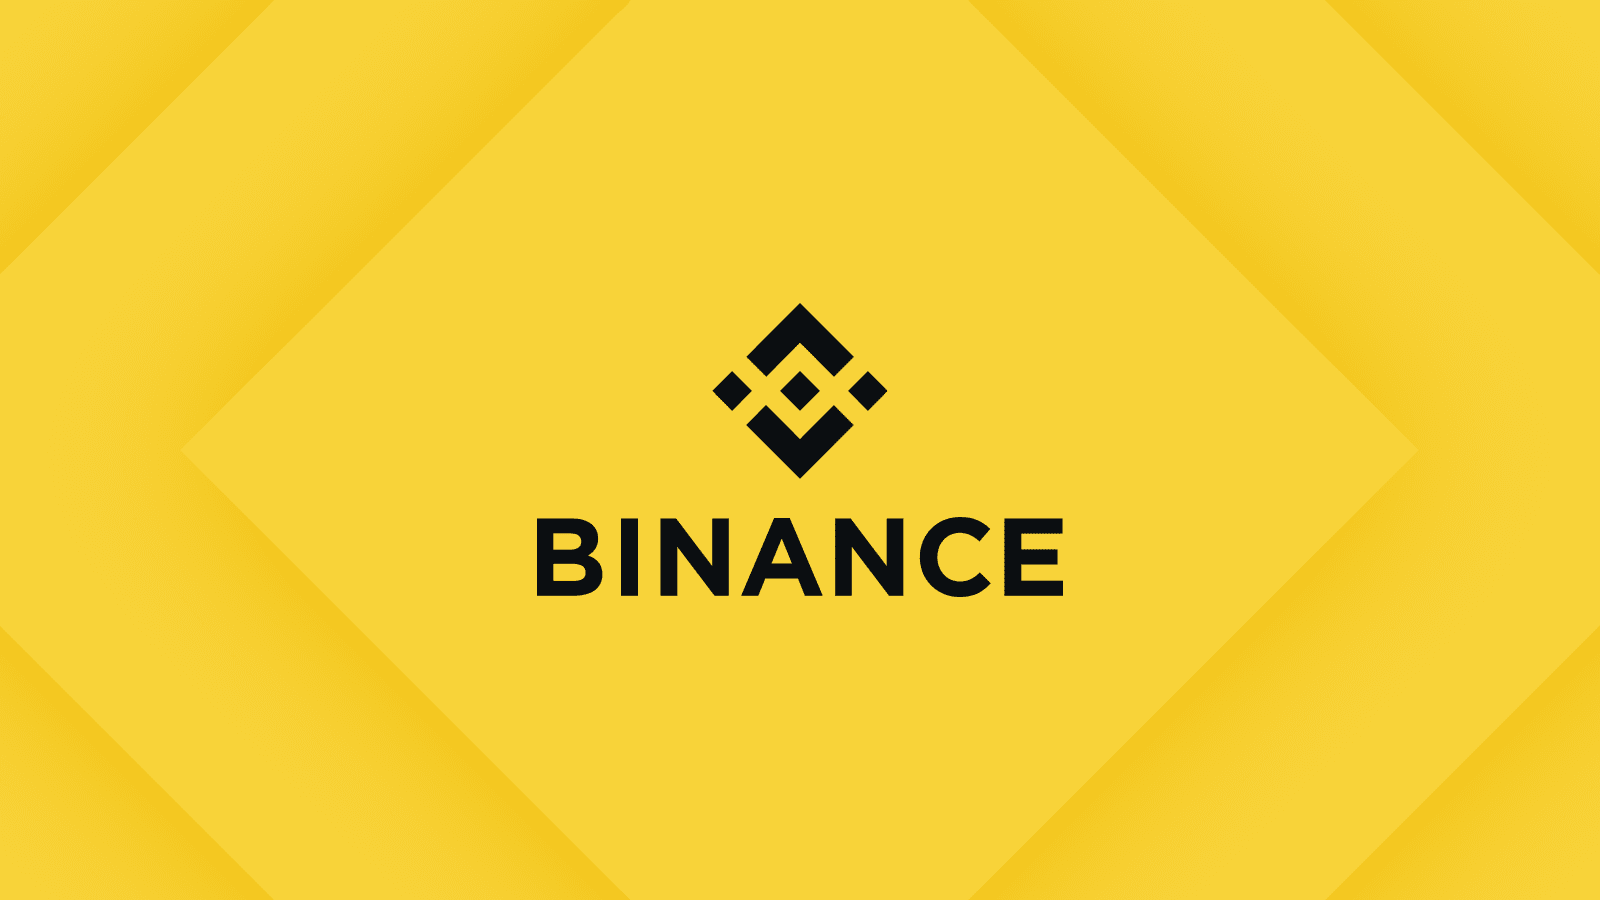 We are disappointed that the SEC chose to file a complaint against Binance" the crypto exchange wrote in its blog